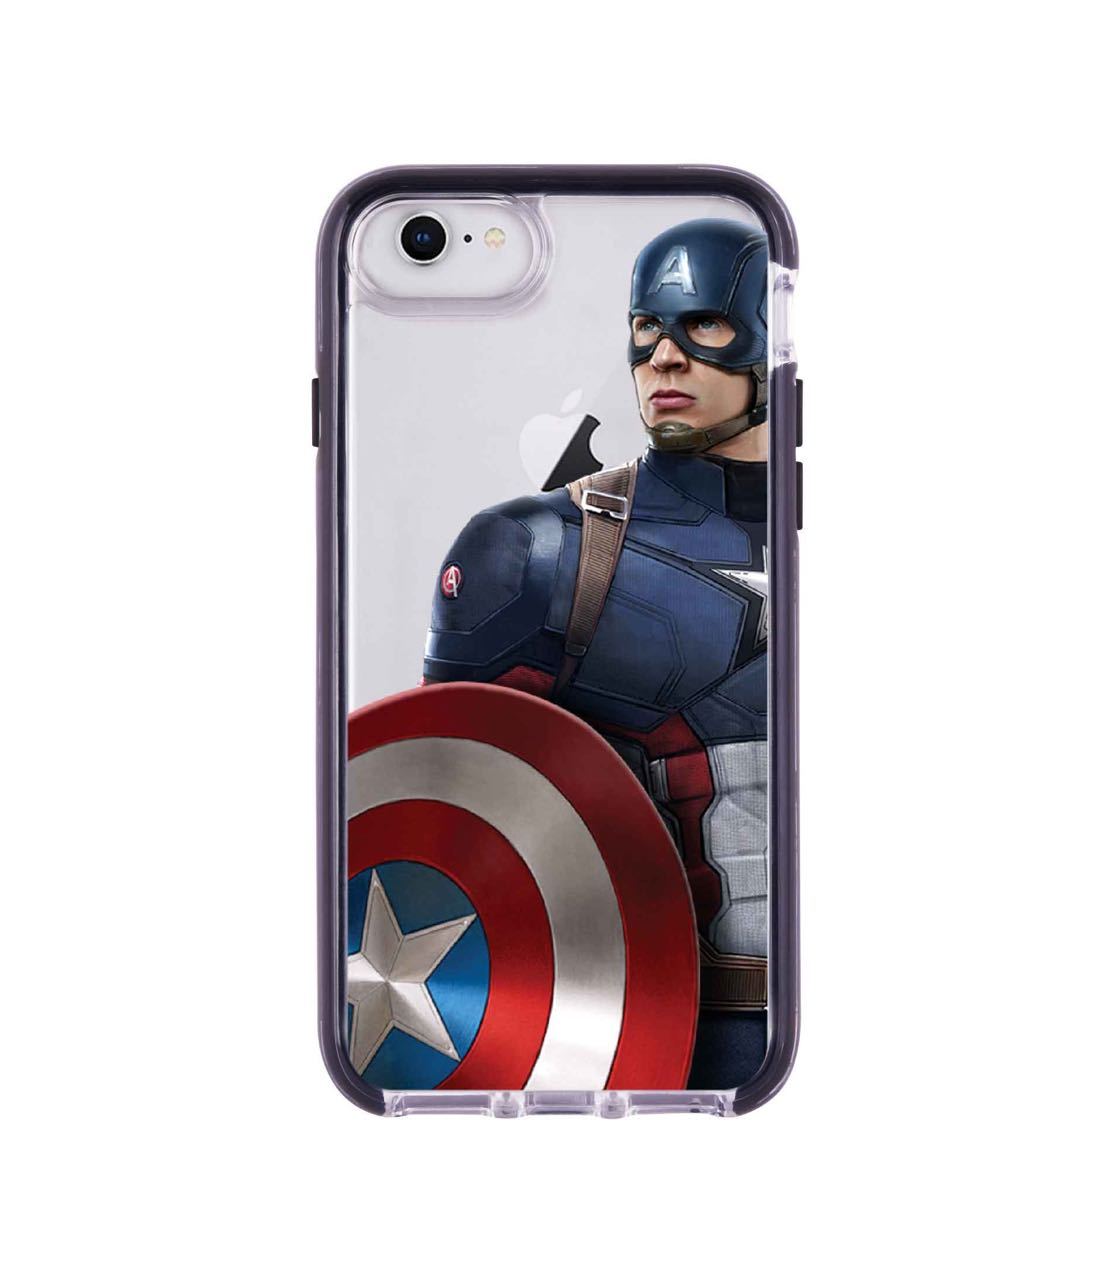 Team Blue Captain - Extreme Phone Case for iPhone SE (2020)